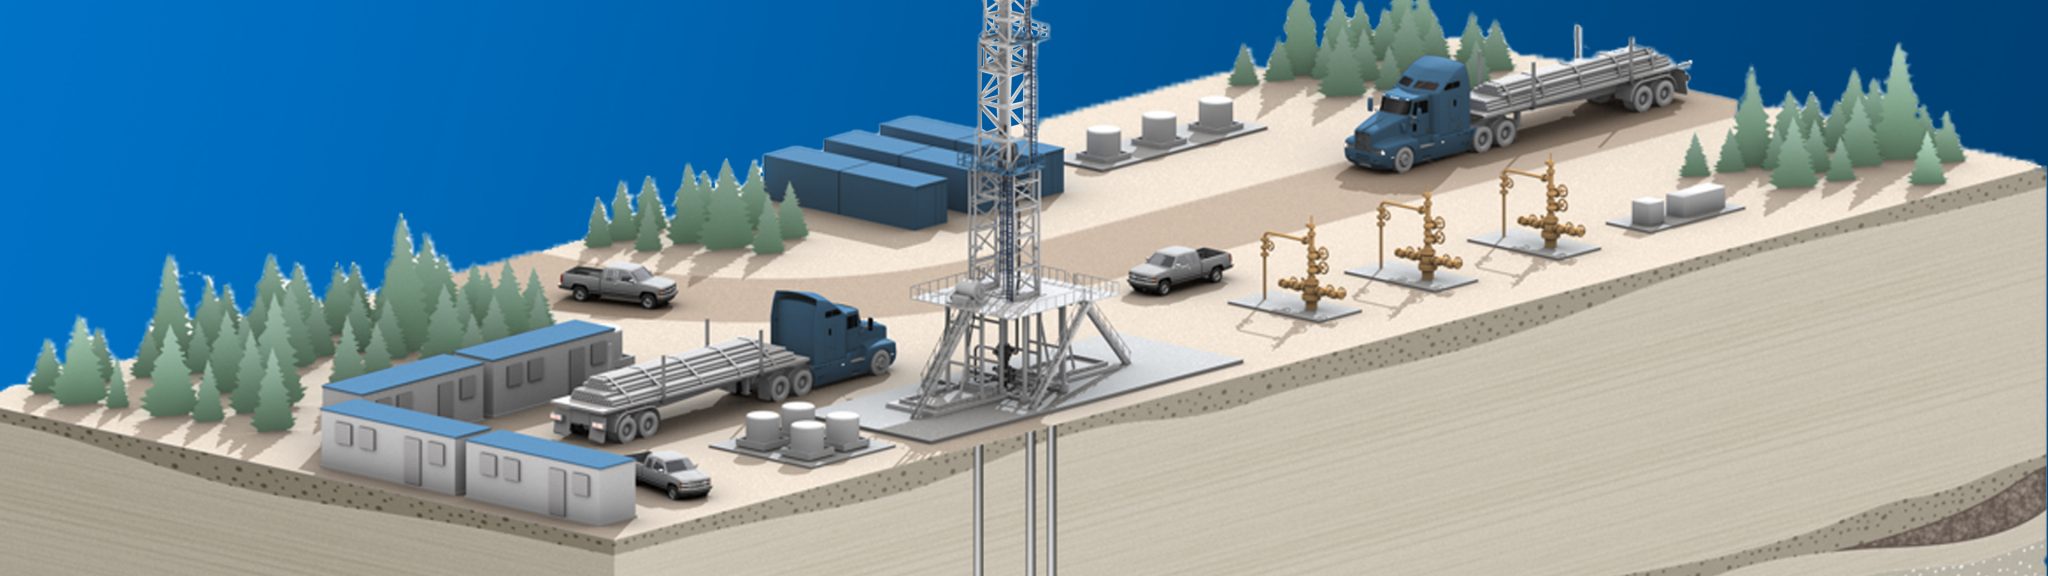 A rendering of a natural gas wellhead